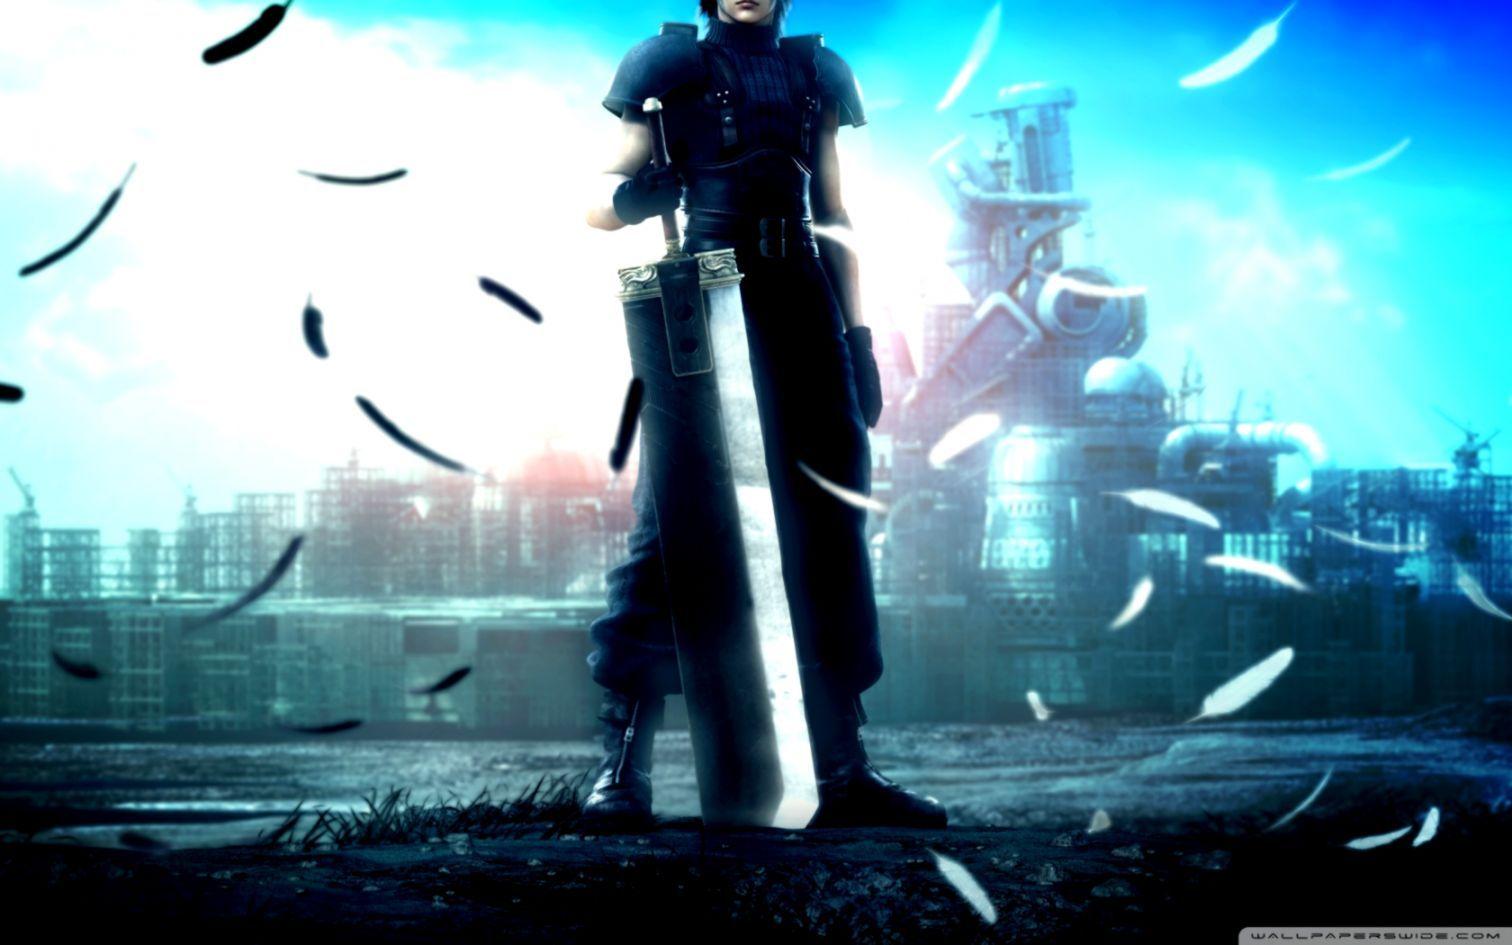 Final Fantasy Vii Wallpapers Top Free Final Fantasy Vii Backgrounds Wallpaperaccess